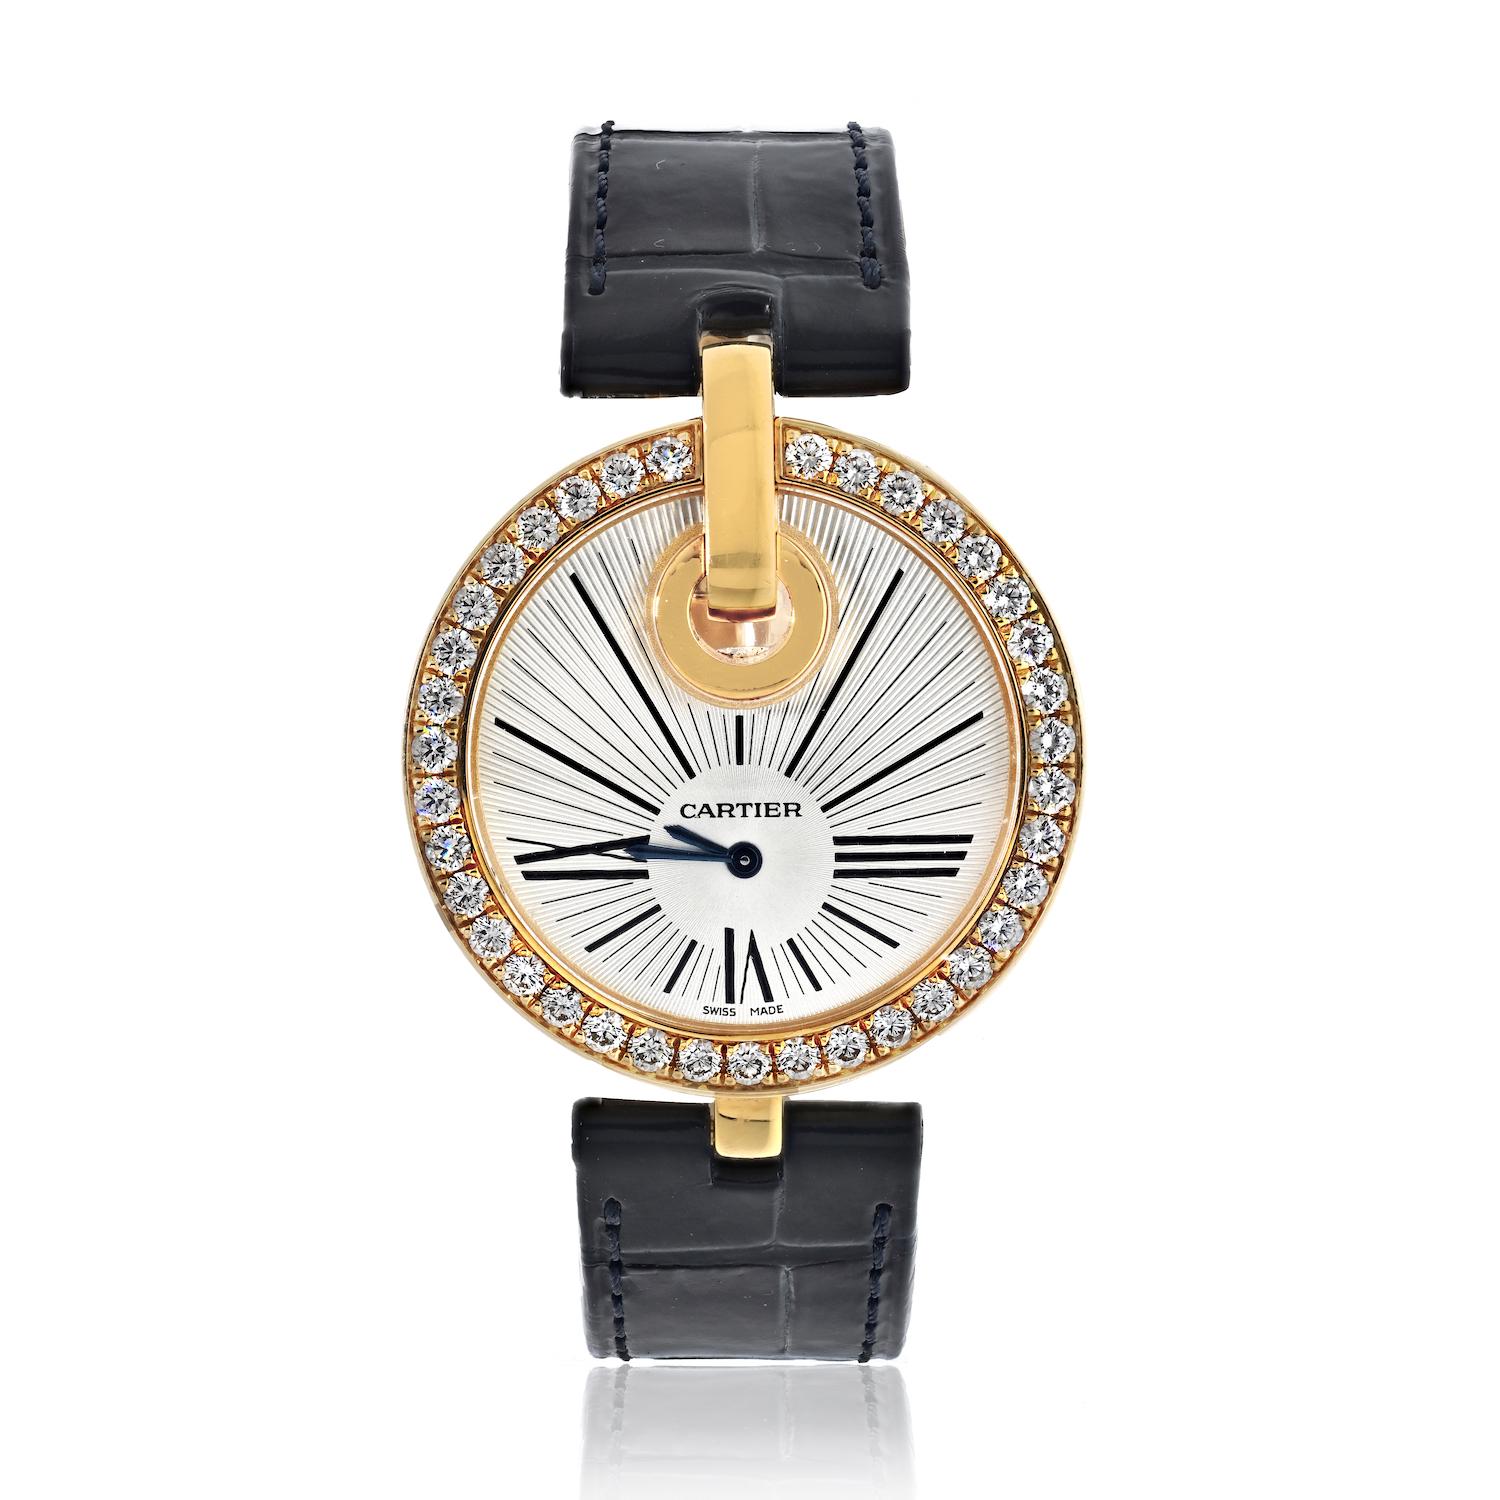 Owning a Cartier watch is a mark of prestige, and the Cartier 18K Yellow Gold Captive Diamond Case Watch is a testament to your appreciation for excellence.

The watch features a 35mm dial, an ideal size that's neither too bold nor too understated.